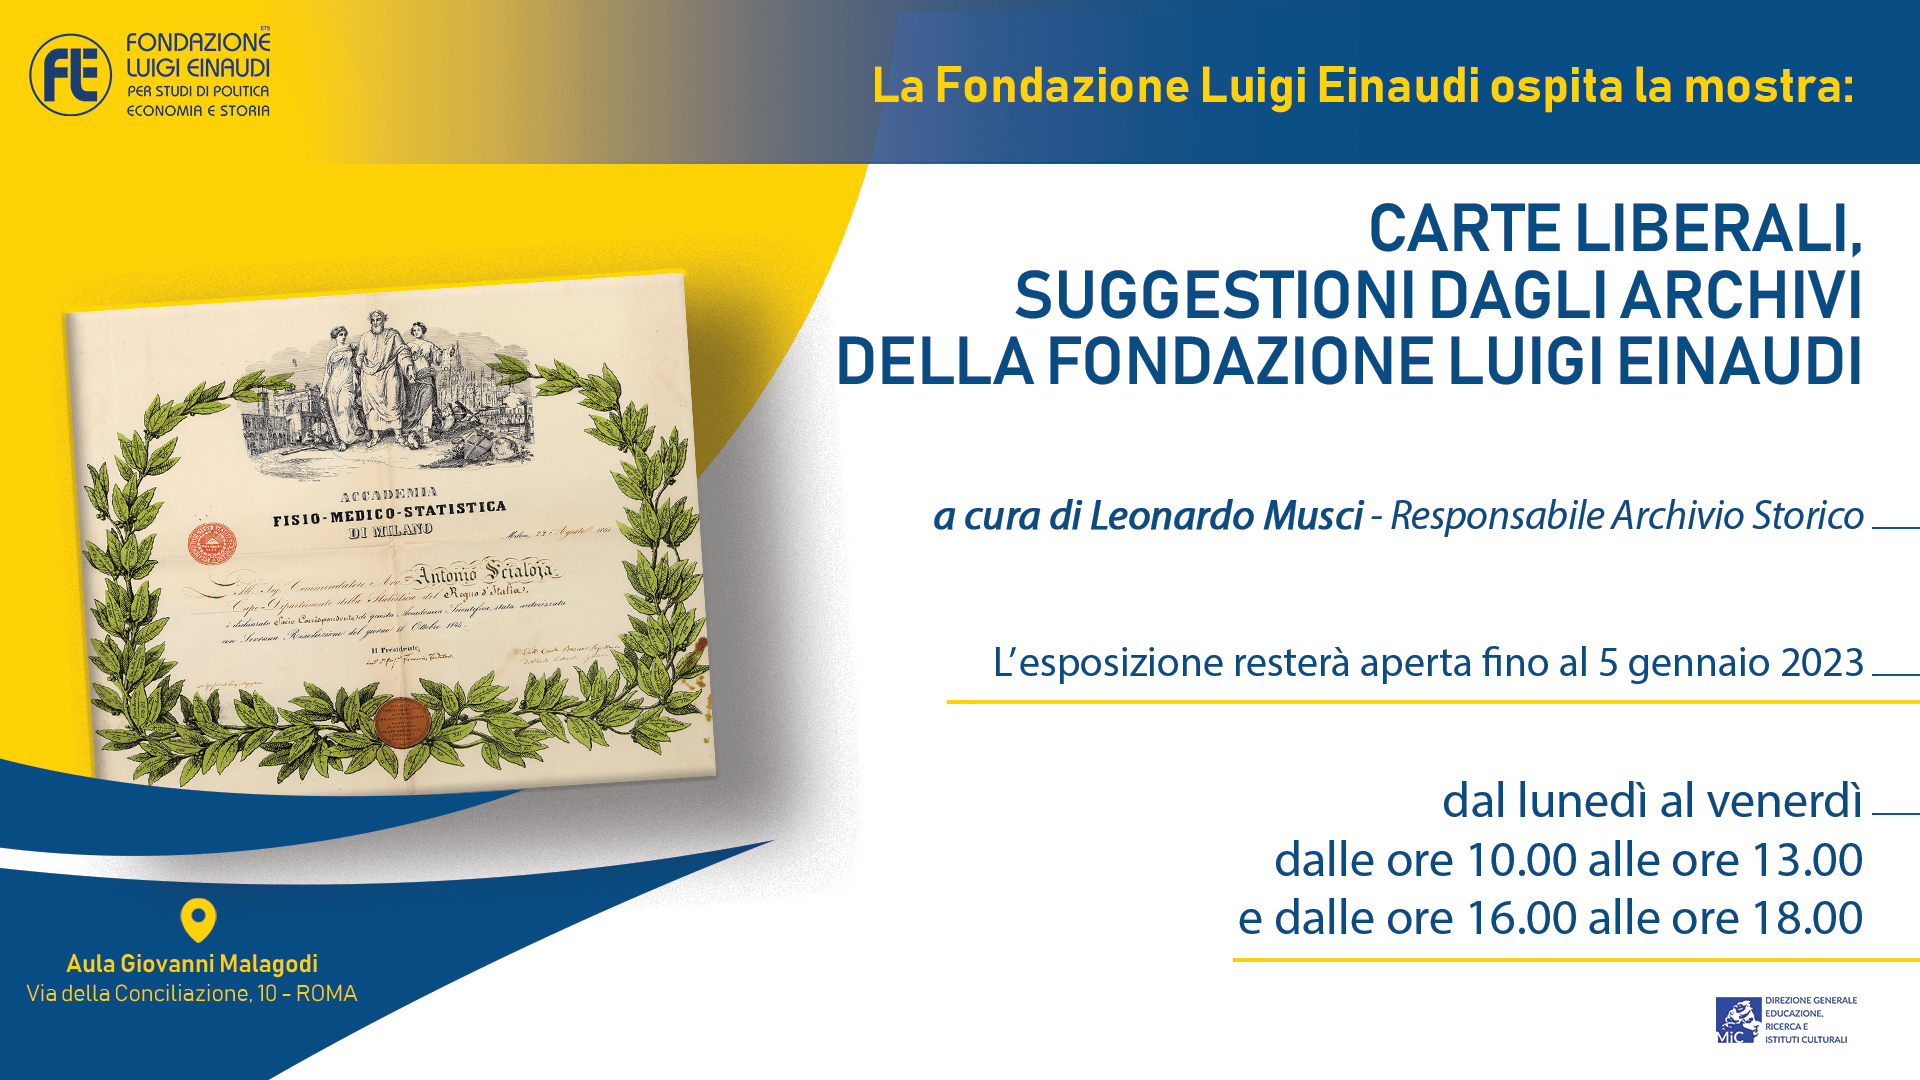 Liberal papers, suggestions from the Luigi Einaudi Foundation archives